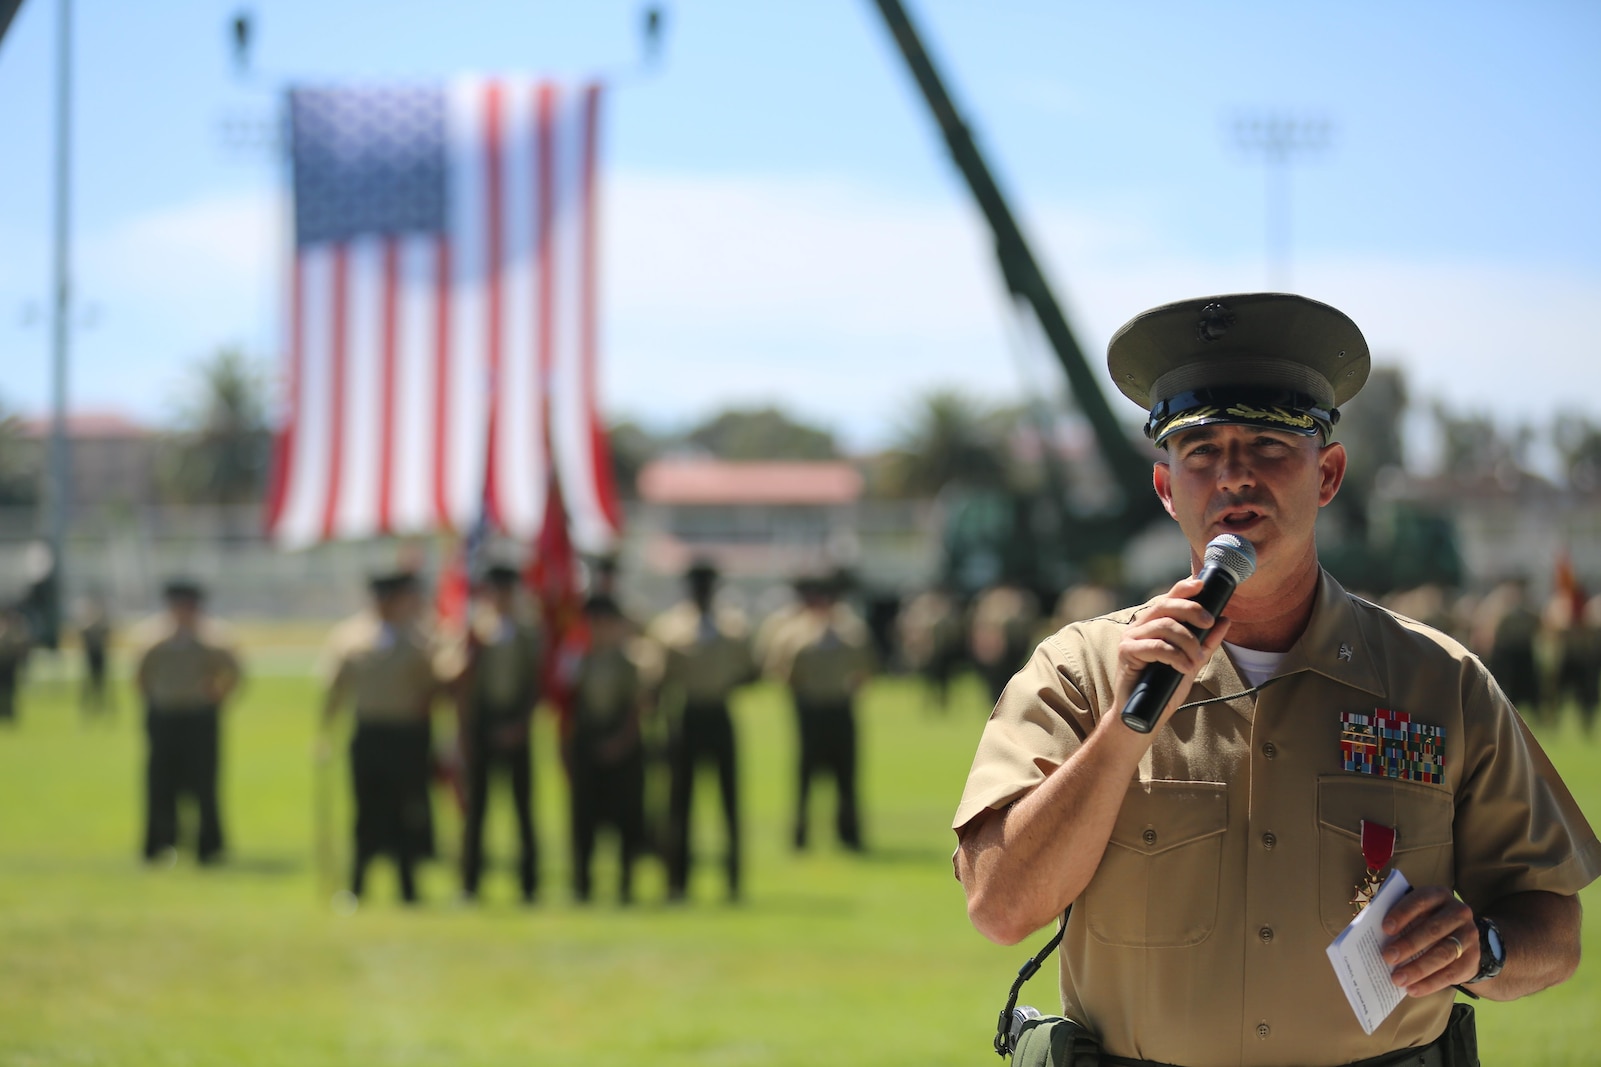 U.S. Marine Corps Col. Eric B. Kraft, off going commanding officer, Headquarters Regiment, 1st Marine Logistics Group, 1 Marine Expeditionary Force, addresses a crowd during the Change of Command Ceremony for Headquarters Regiment aboard Camp Pendleton Calif., May 1, 2015. The Change of Command Ceremony for Headquarters Regiment showcased the passing of command from Col. Eric B. Kraft to Col. Phillip N. Frietze. (U.S. Marine Corps Photo by Cpl. Rodion Zabolotniy, combat camera/ released)